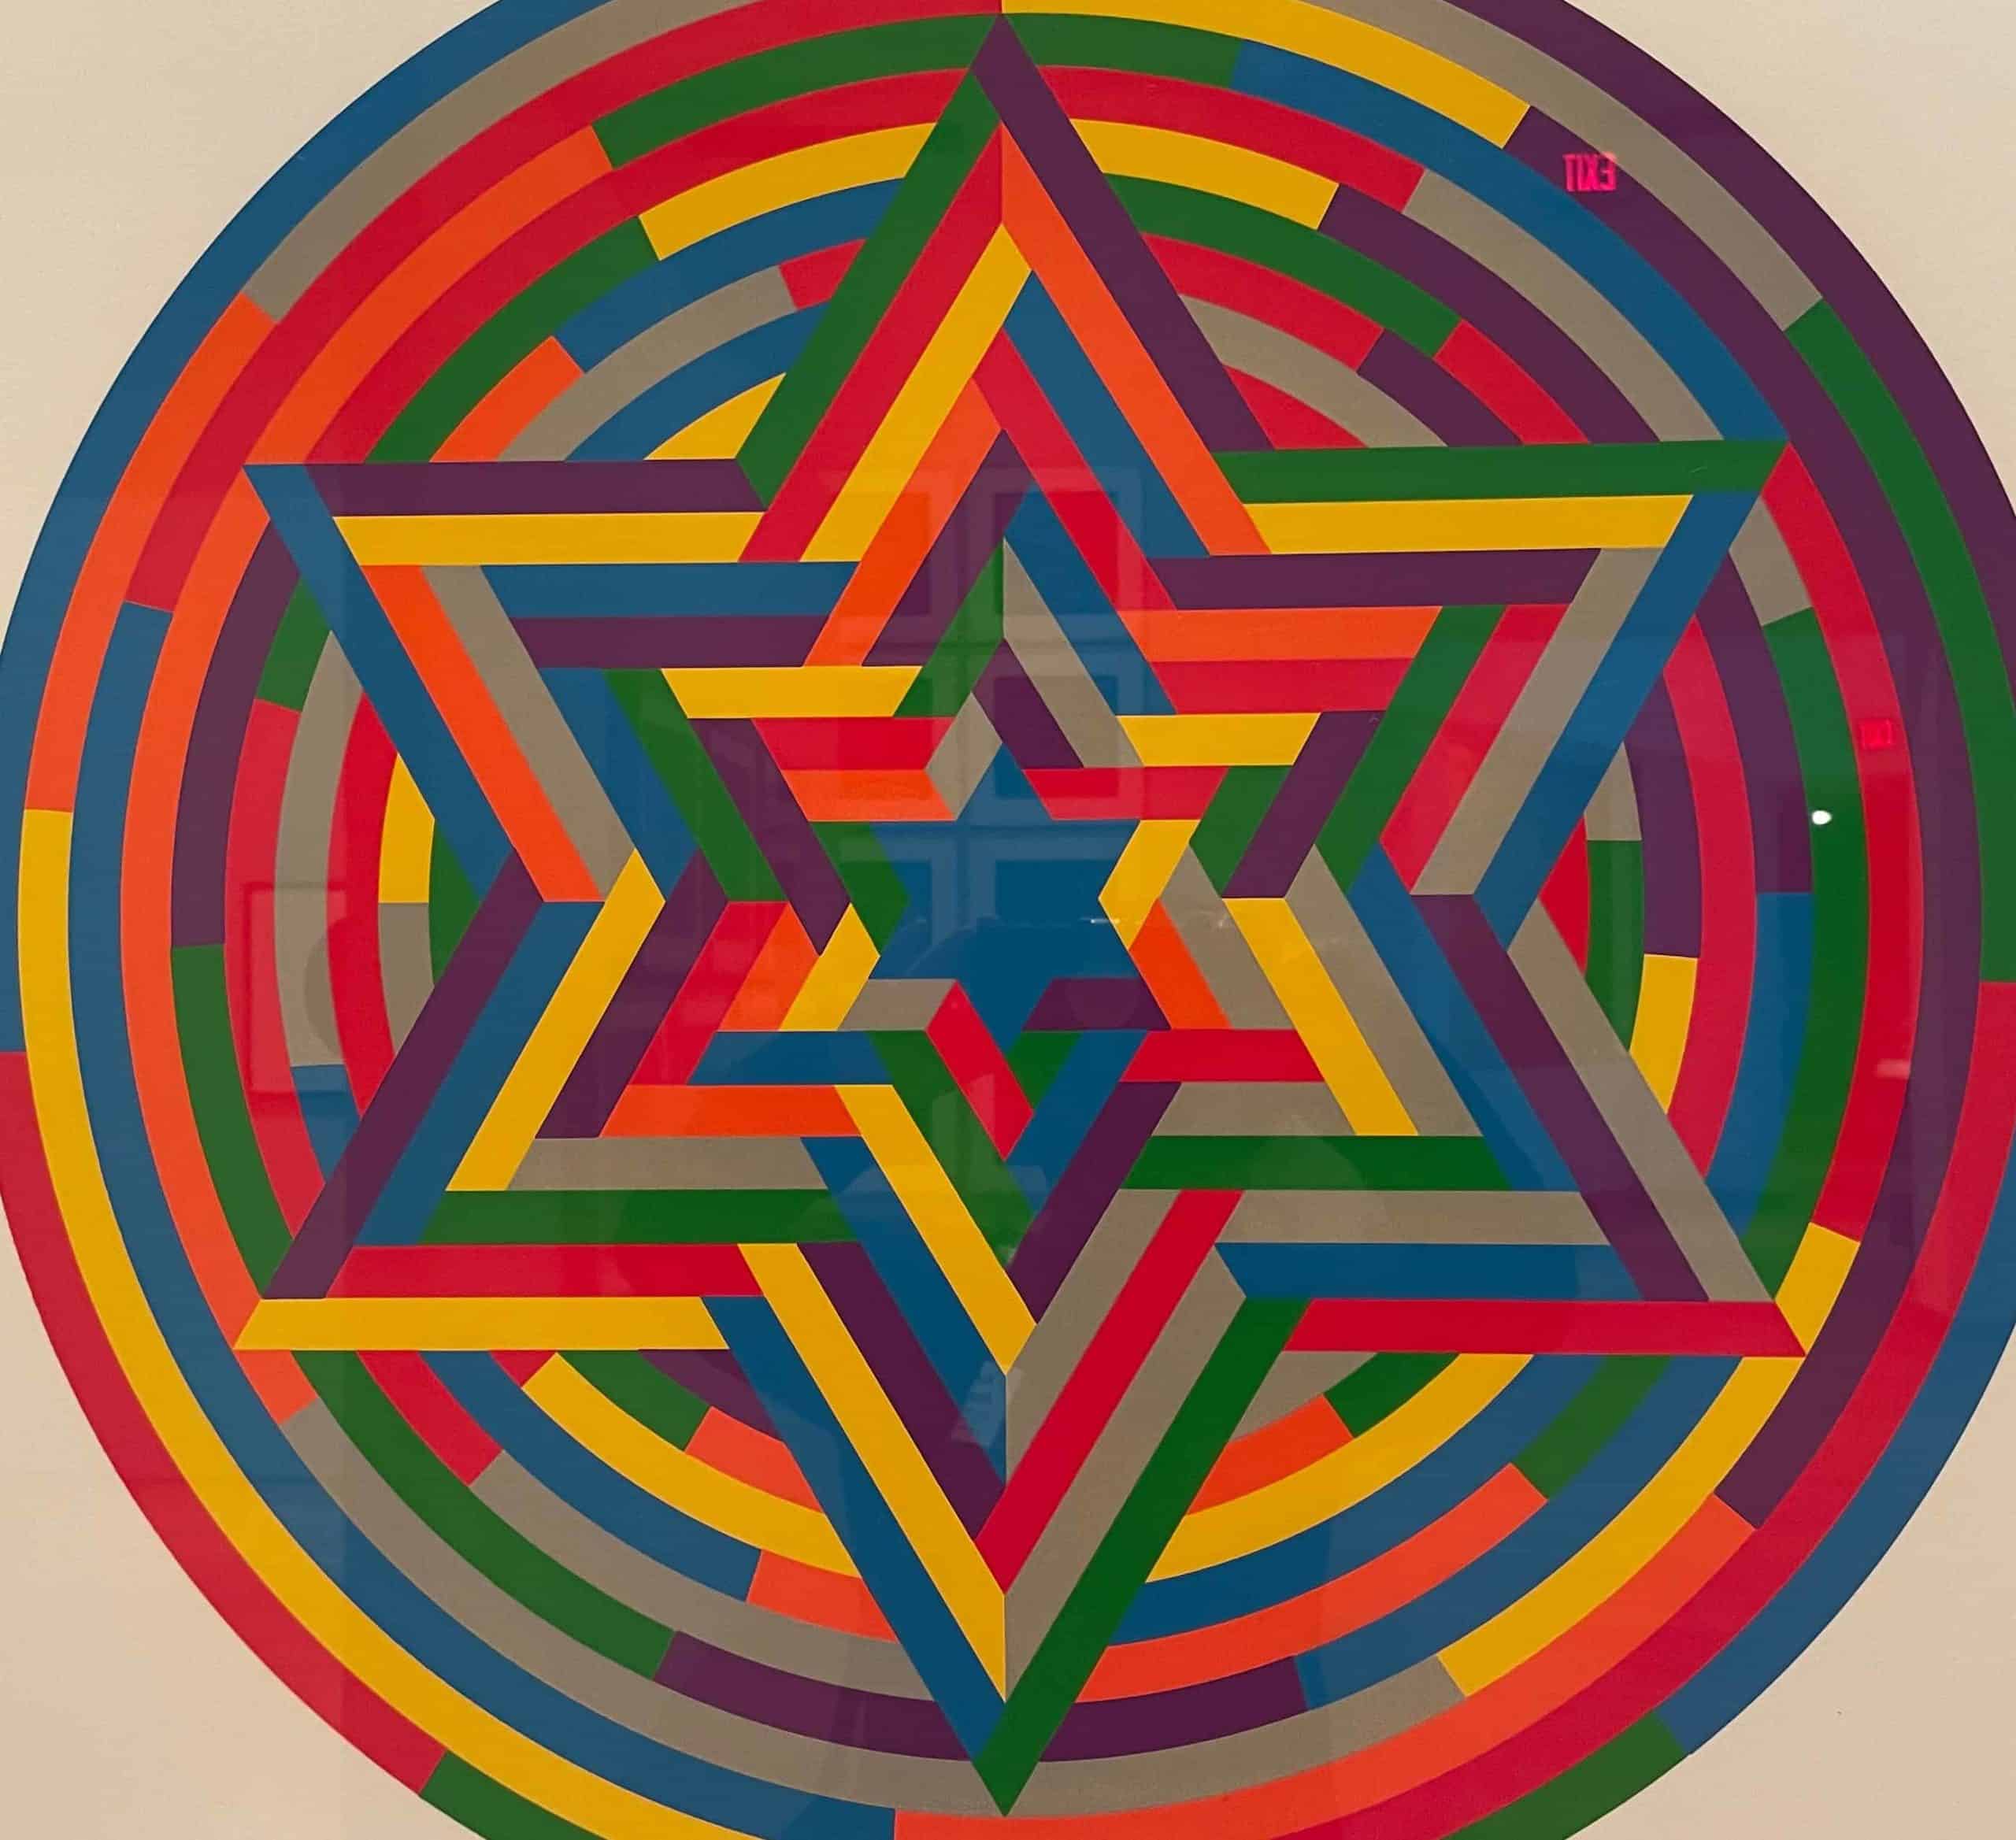 Sol LeWitt's Shul Print, a vividly colorful Star of David, appears in Strict Beauty at the Williams College Museum of Art. Press image courtesy of WCMA.